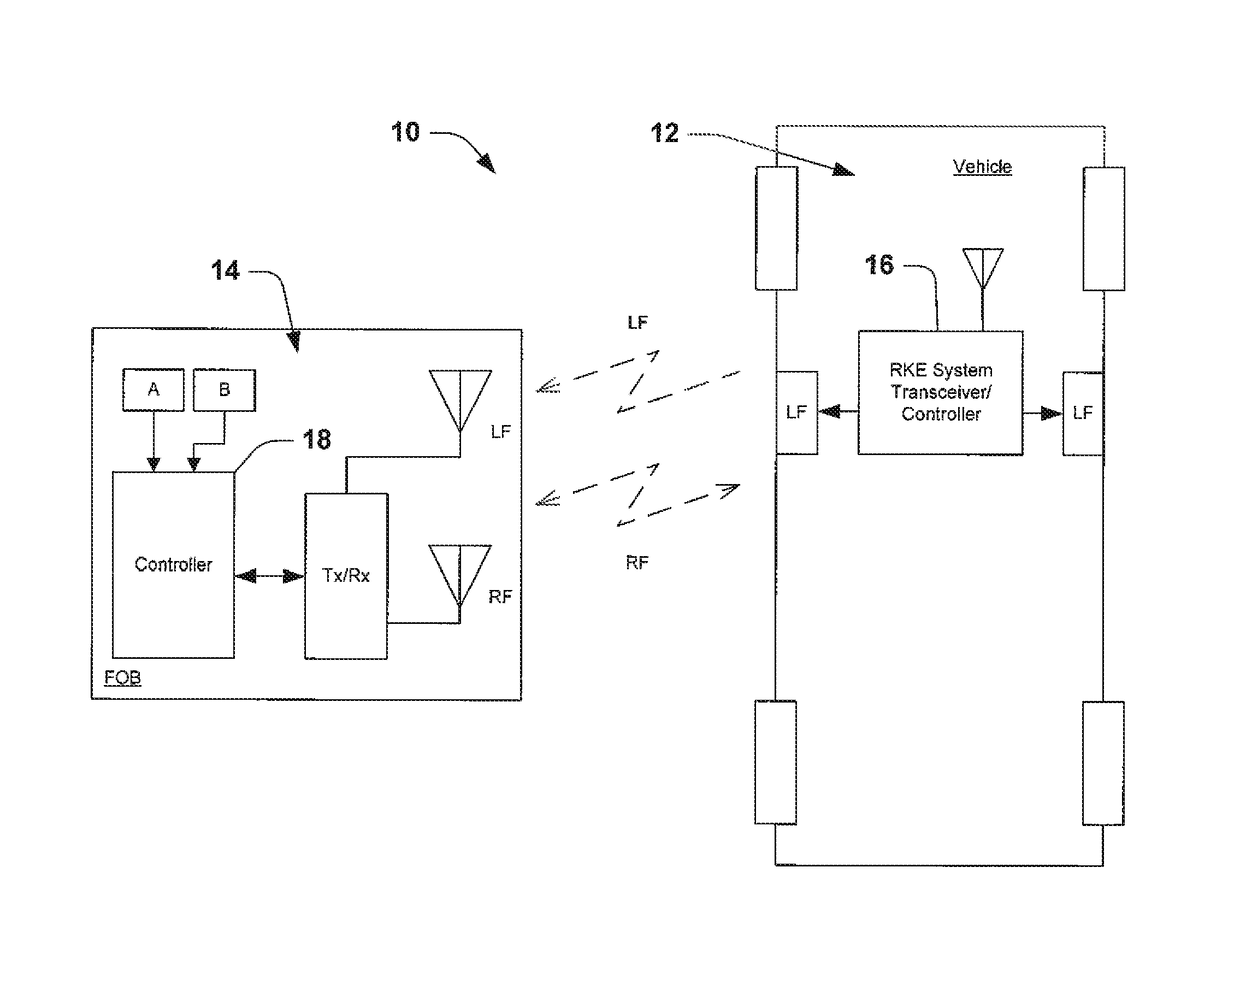 Anti-theft remote keyless entry system using frequency hopping with amplitude level control